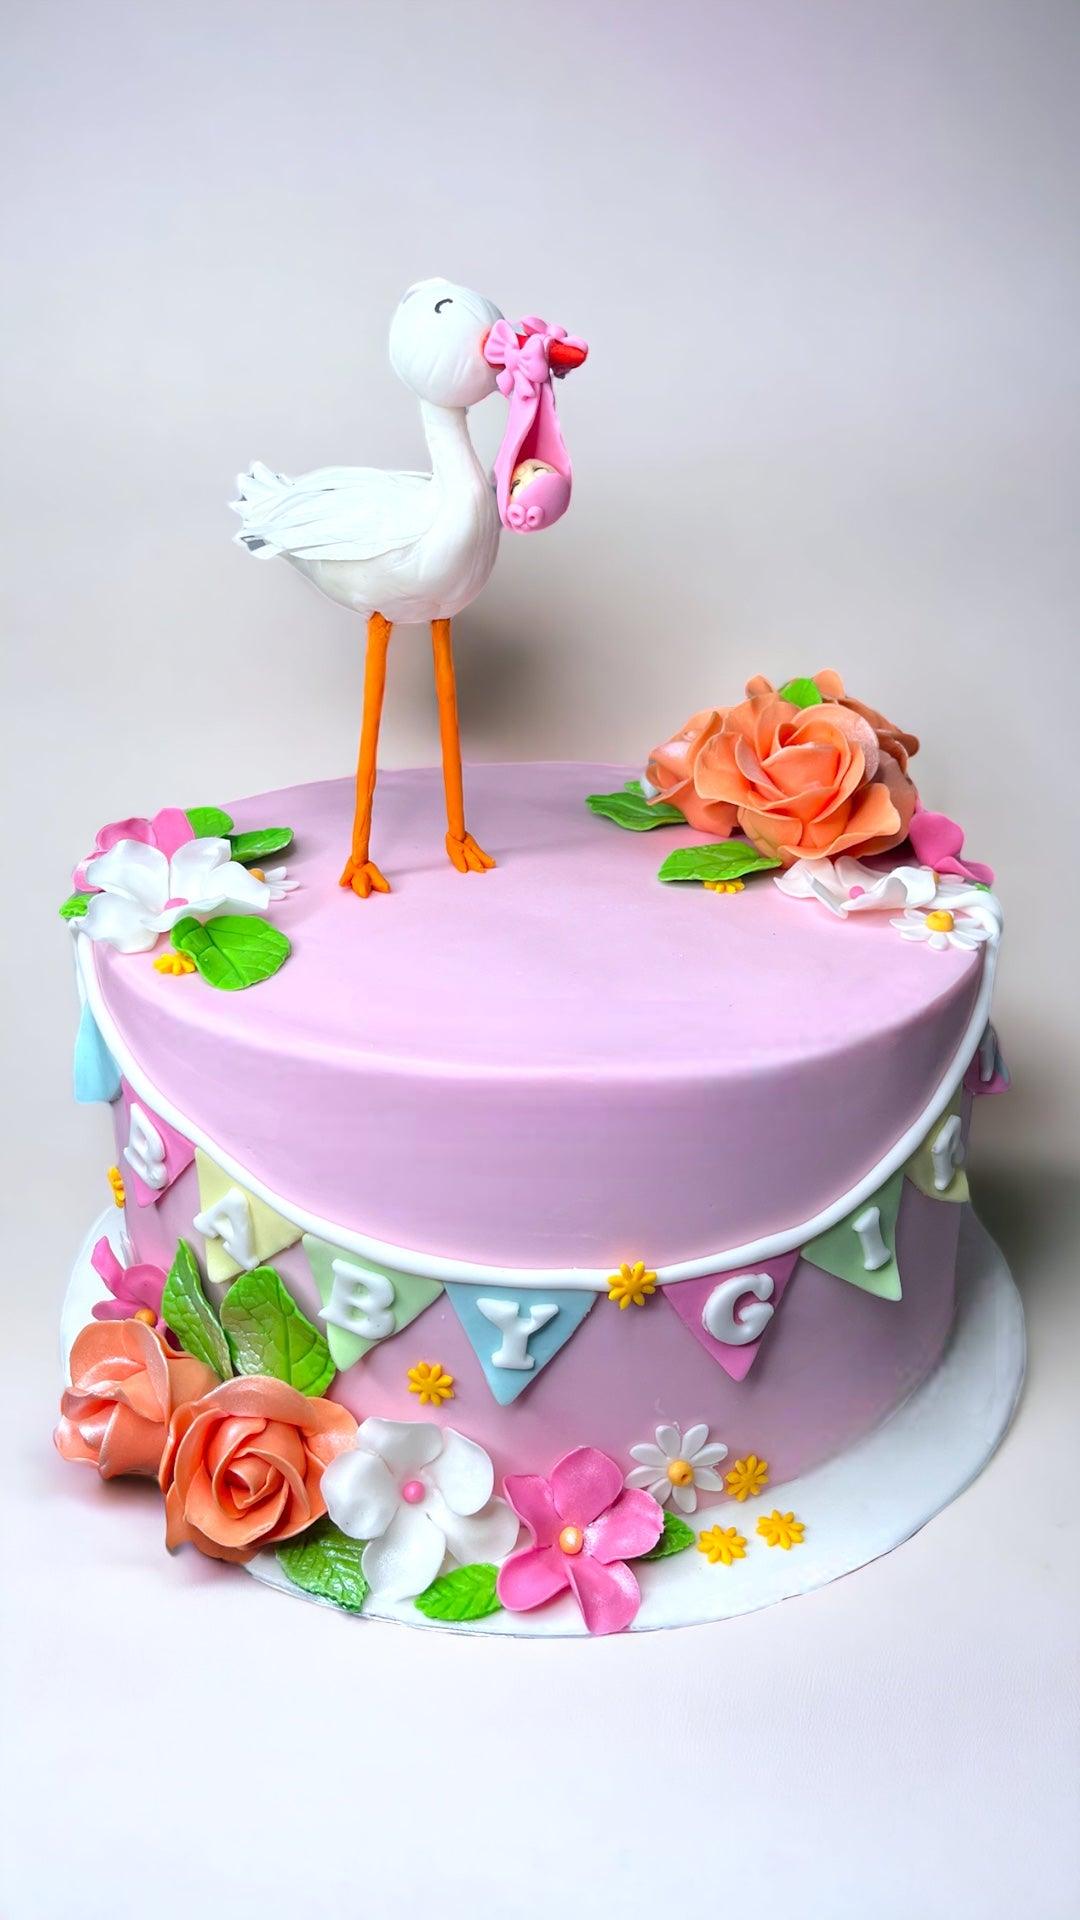 Gender reveal cake - Naturally_deliciousss